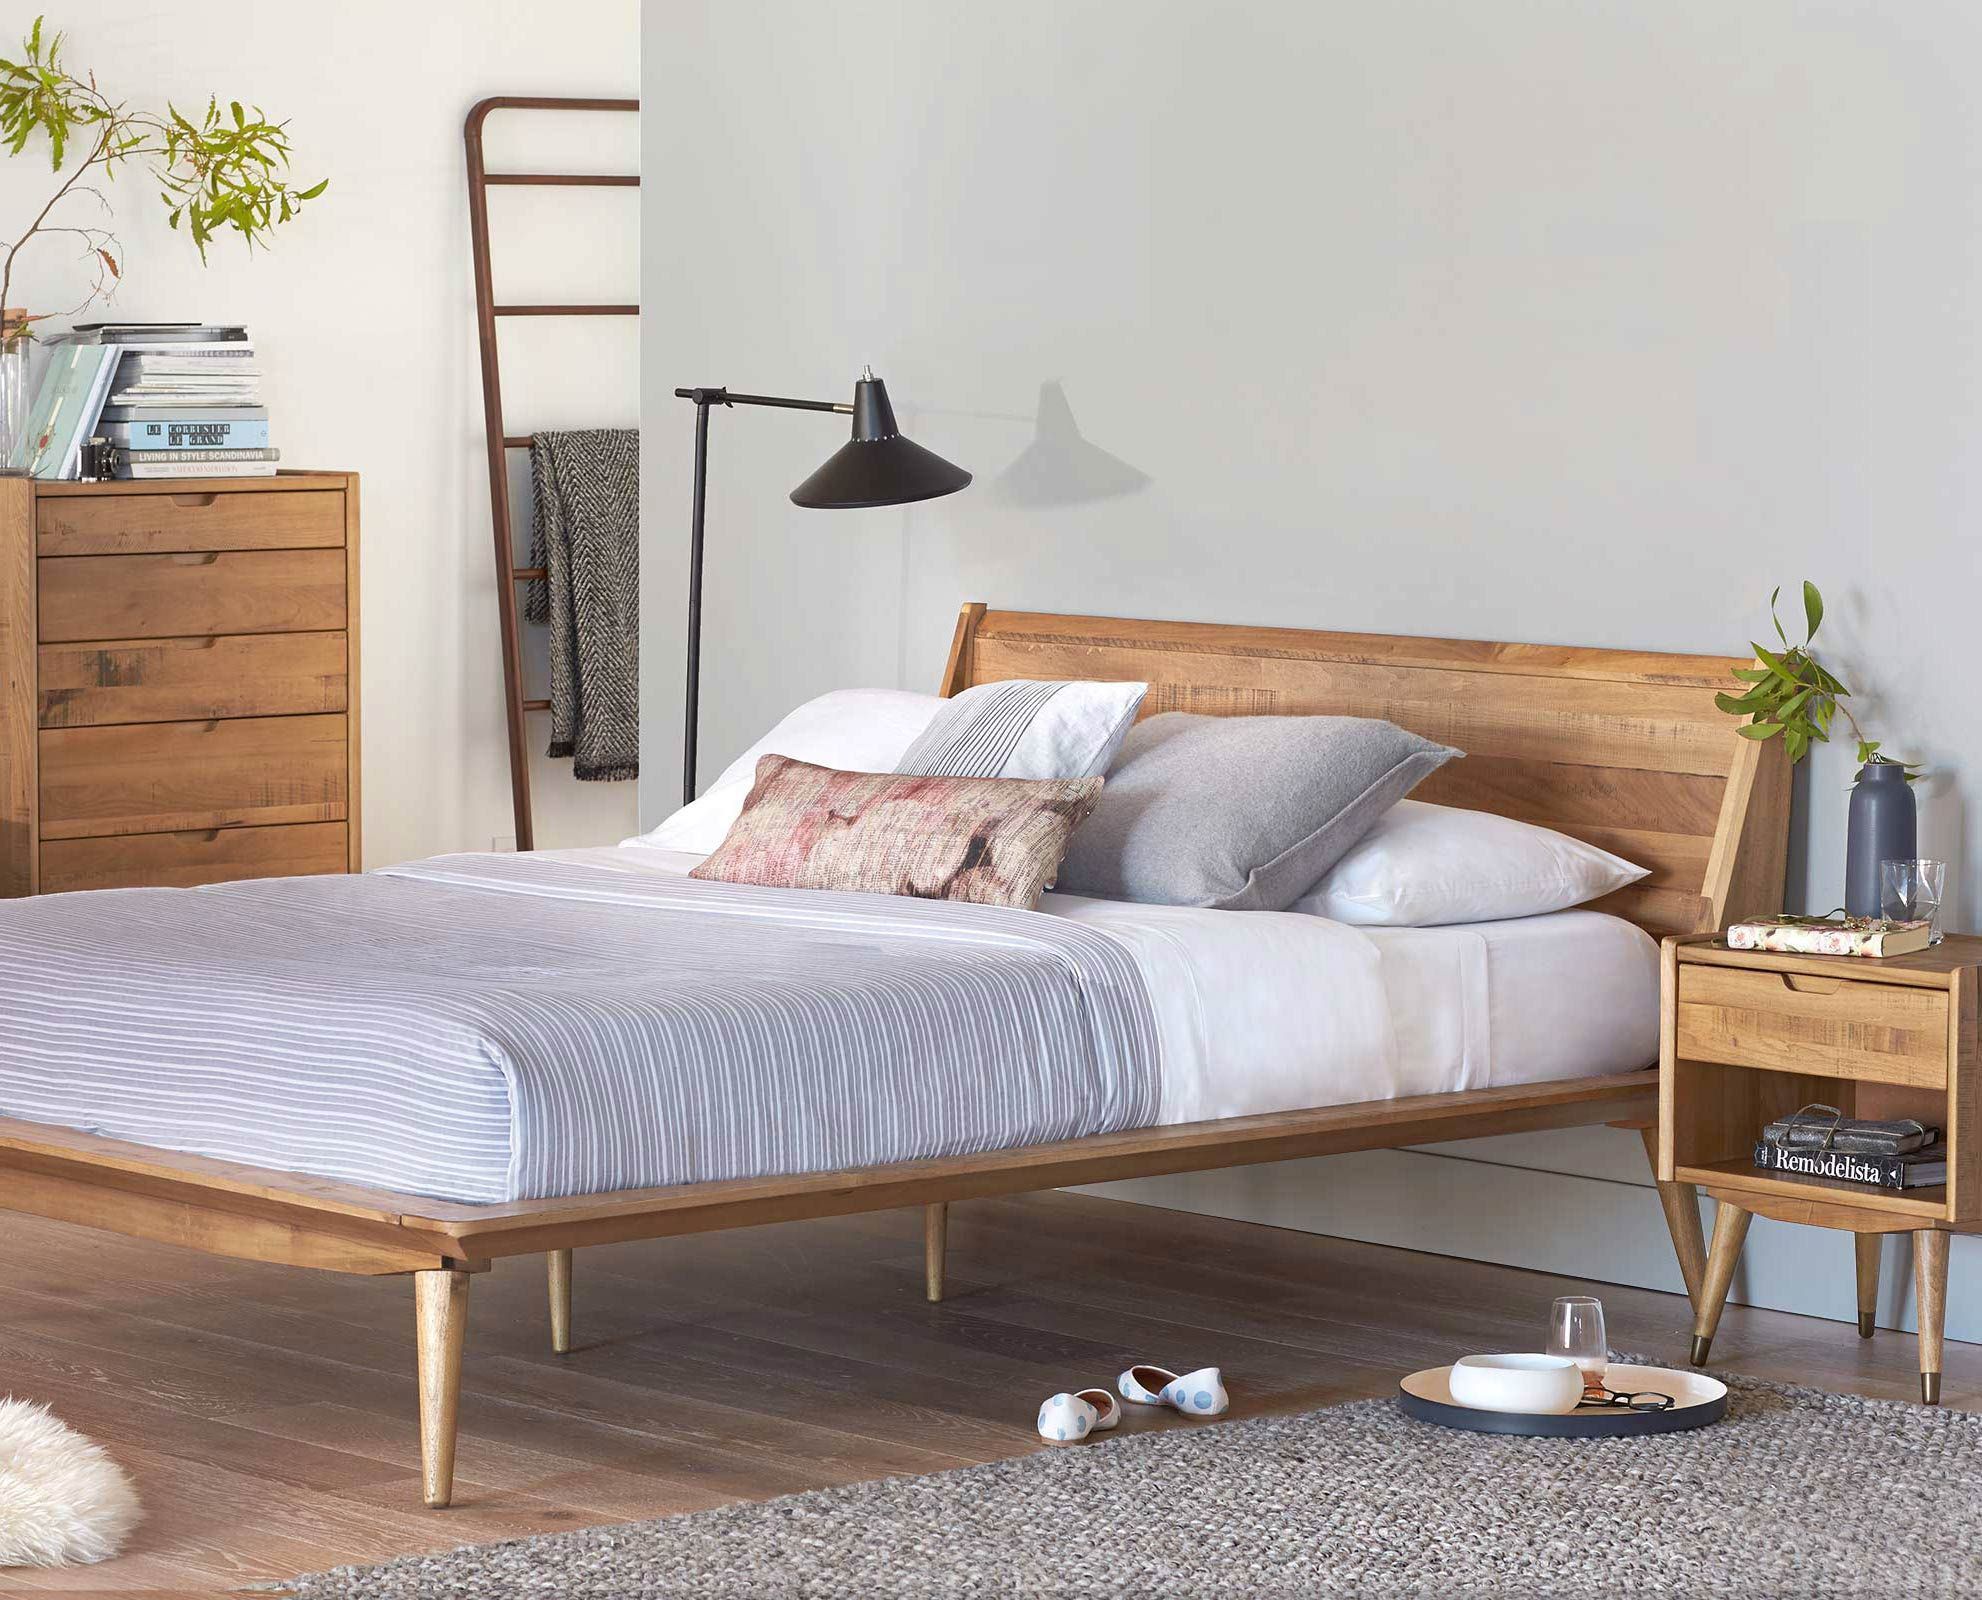 Dania – The Nordic-inspired Bolig bed is crafted from solid poplar and features a warm stain exposing the natural texture of the